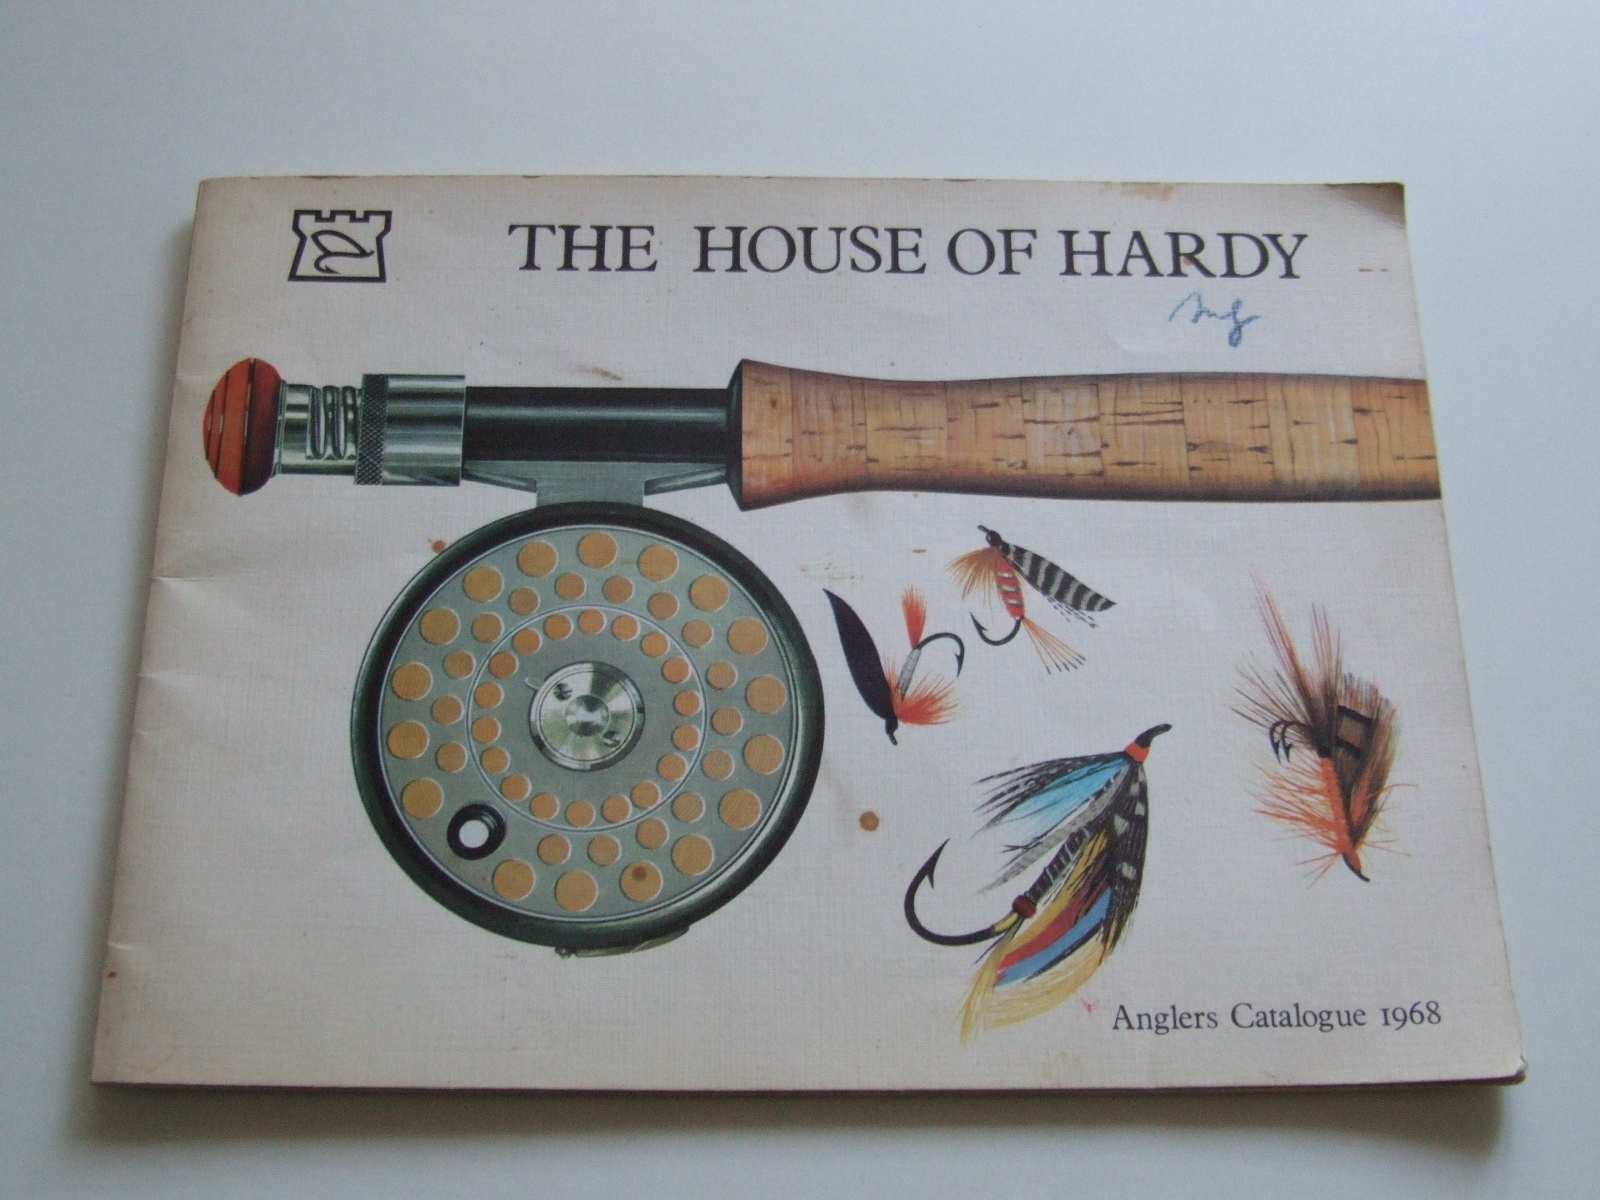 FLY FISHING. HARDY'S ANGLERS GUIDE - CORONATION NUMBER 1937 - INCREDIBLY  WELL FEEDING FISHING CATALOG ILLUSTRATED WITH BL. A. 23 COLORED PLATES.  Books, Maps & Manuscripts - Books - Auctionet